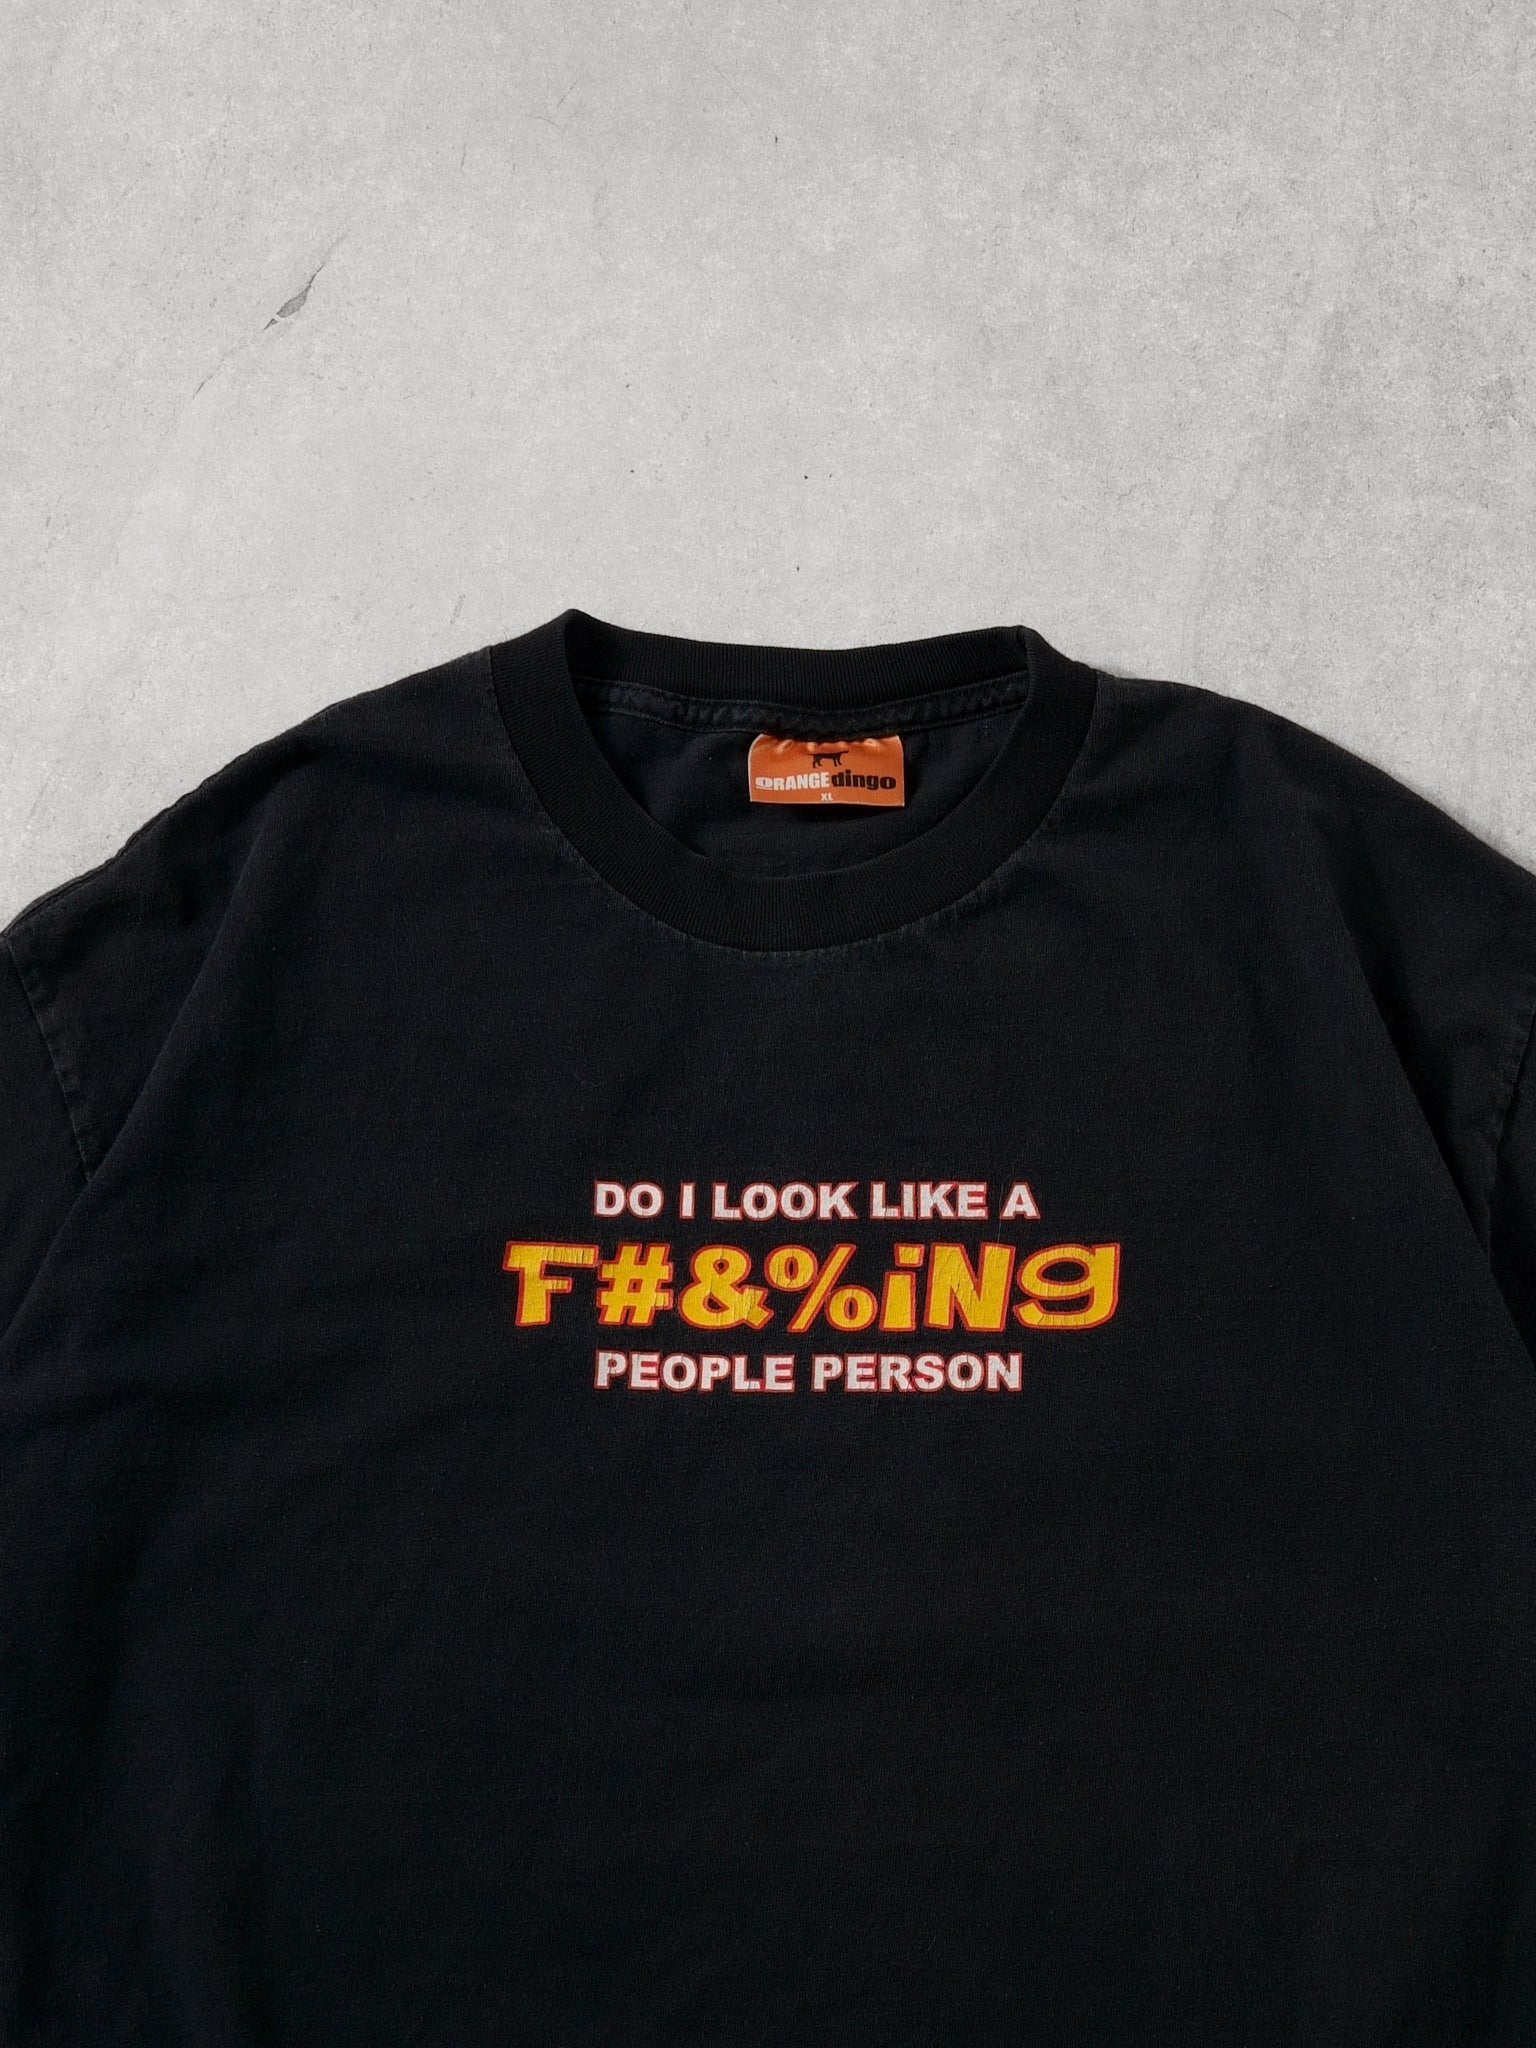 Vintage Y2K Black "Do I Look Like A F#&%ing People Person" Tee (L)